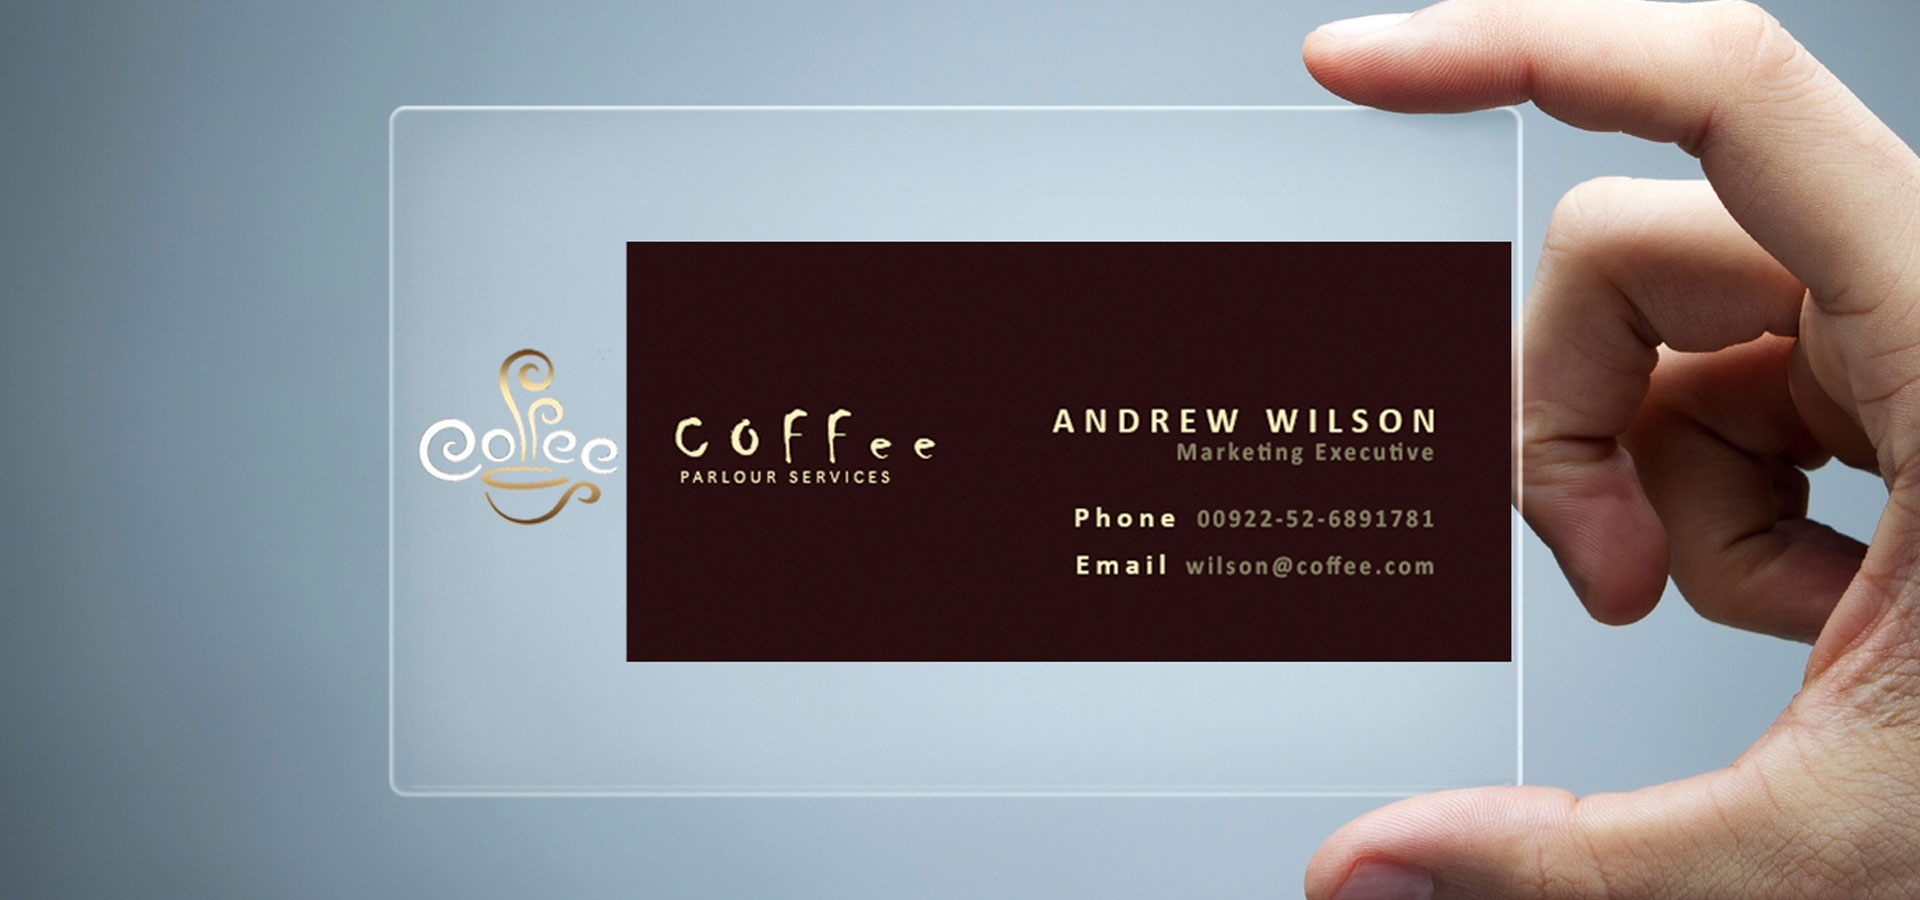 023 Template Ideas Business Card Illustrator Download Intended For Visiting Card Illustrator Templates Download